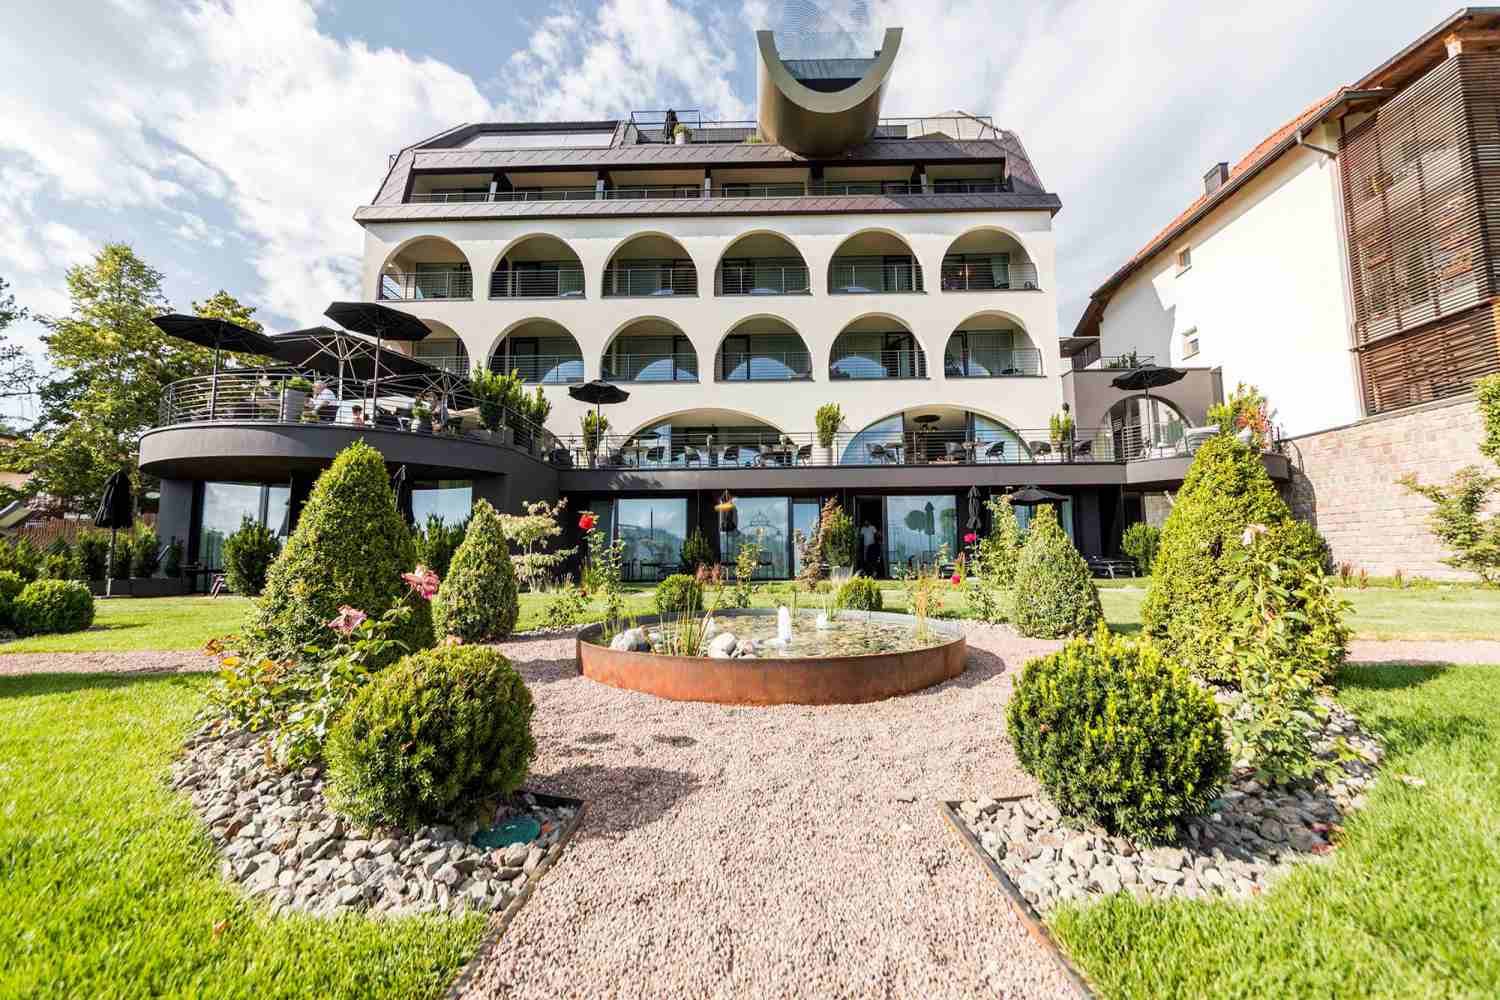 Gloriette Guesthouse Bolzano, South Tyrol - Italy